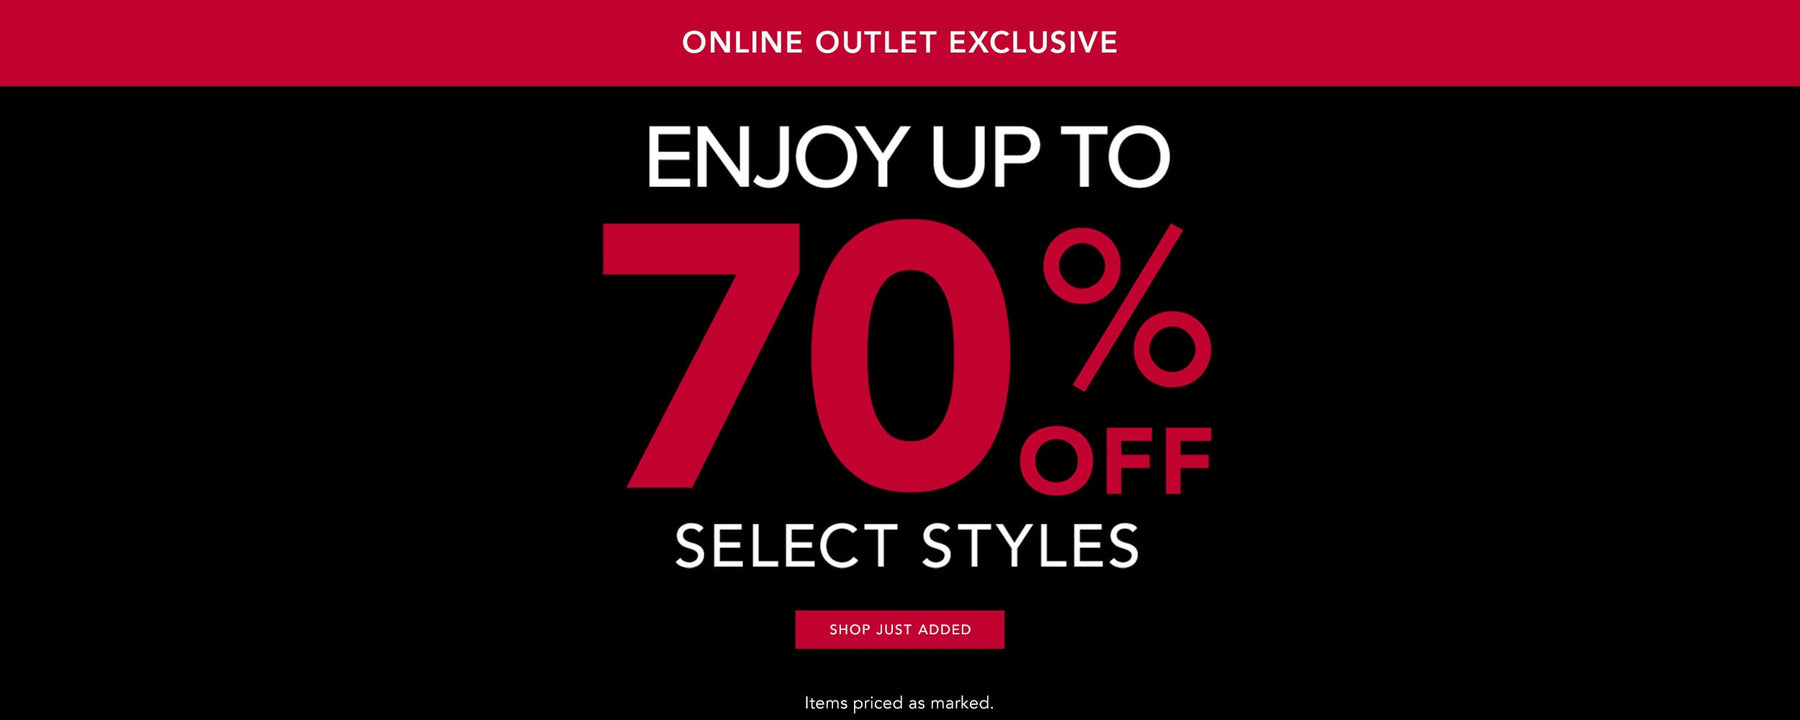 Online Outlet Exclusive. Enjoy up to 70% off select styles. Shop Just Added. Items priced as marked.